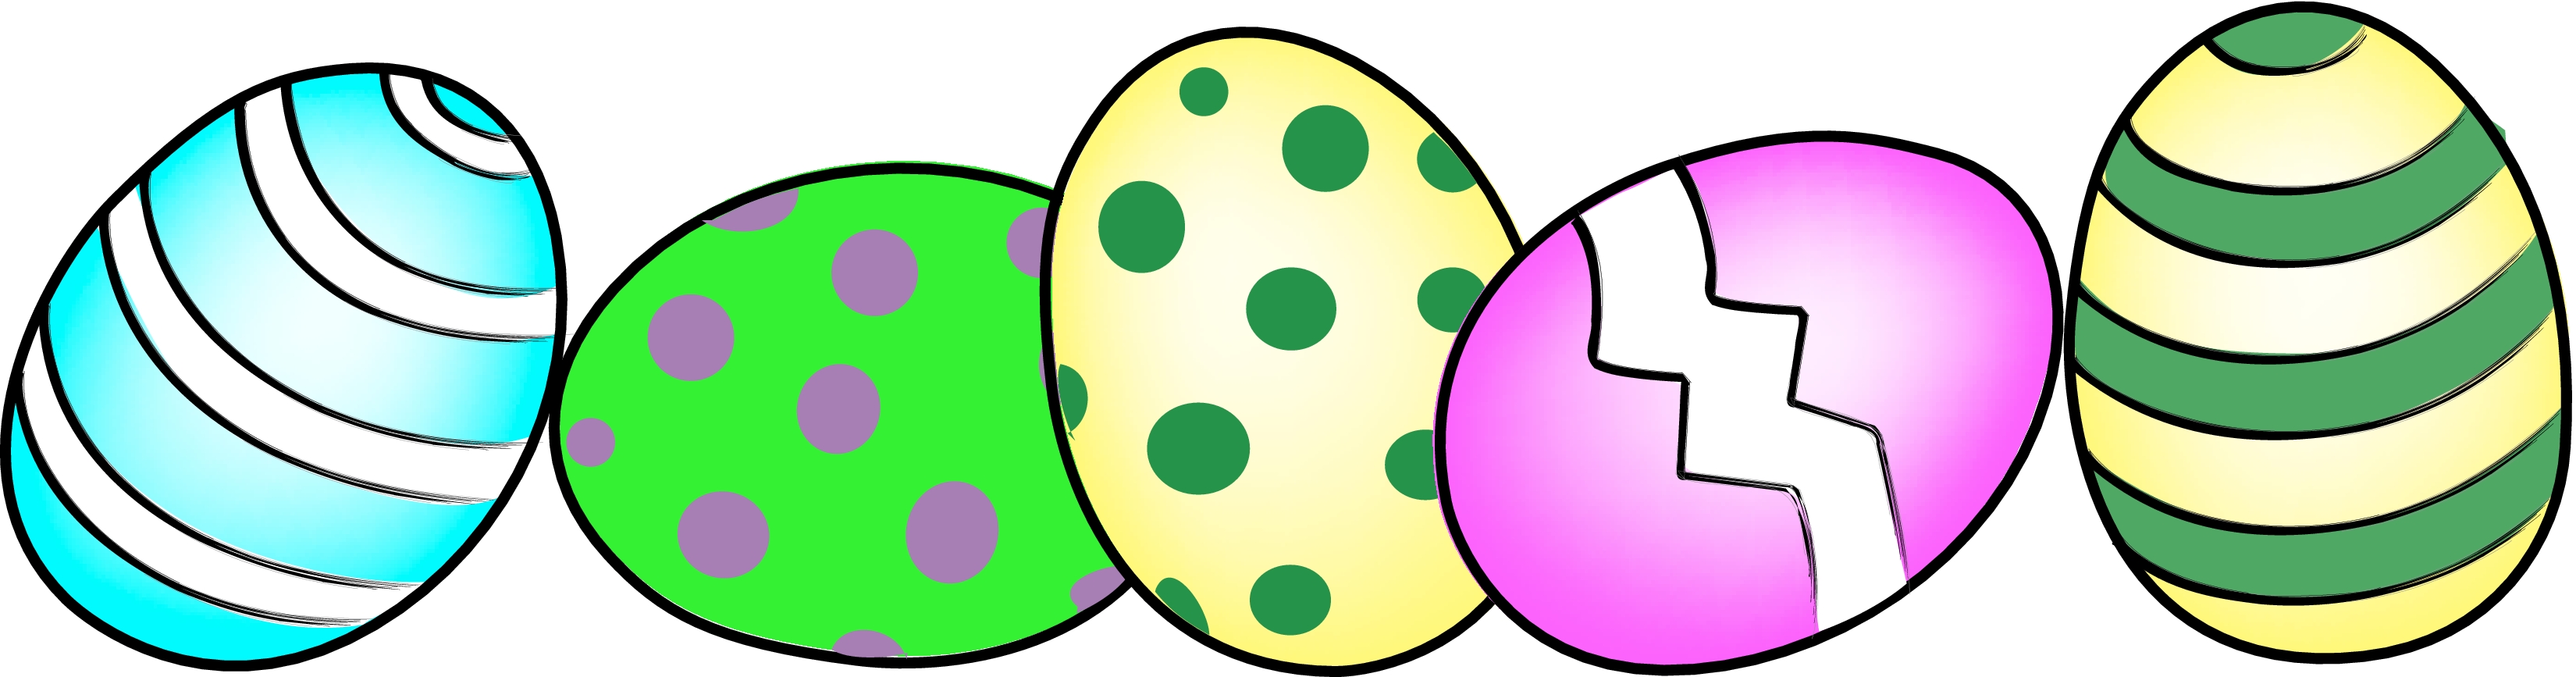 easter clip art images free - photo #9